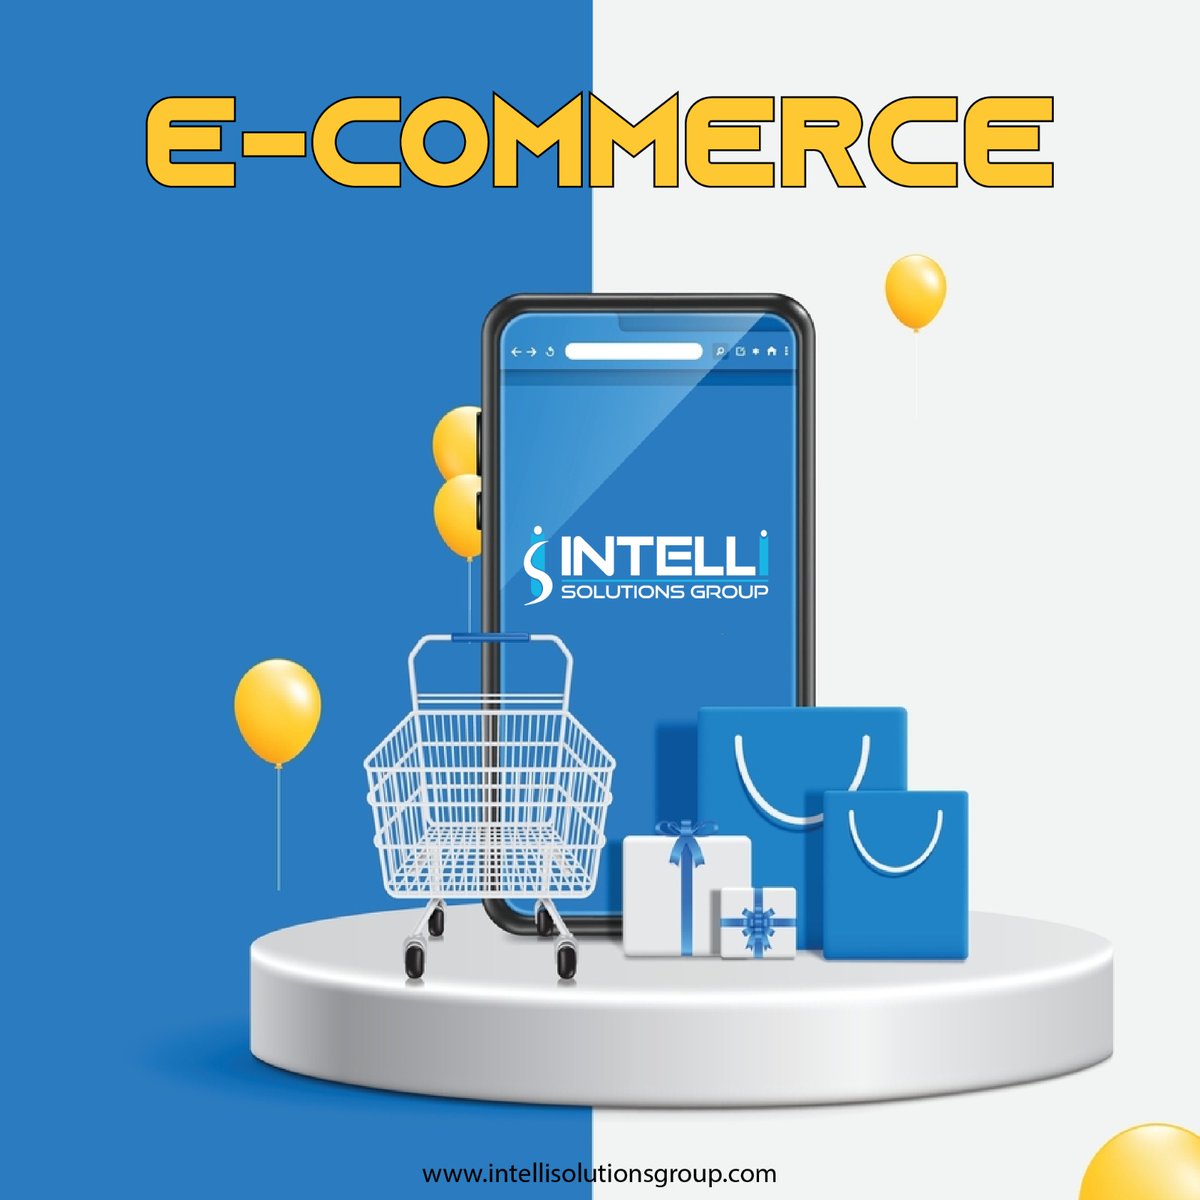 Empowering your business with advanced e-commerce features and tailored solutions 🚀💡
.
.
#ecommerce #intellisolutionsgroup #ecommerceservices